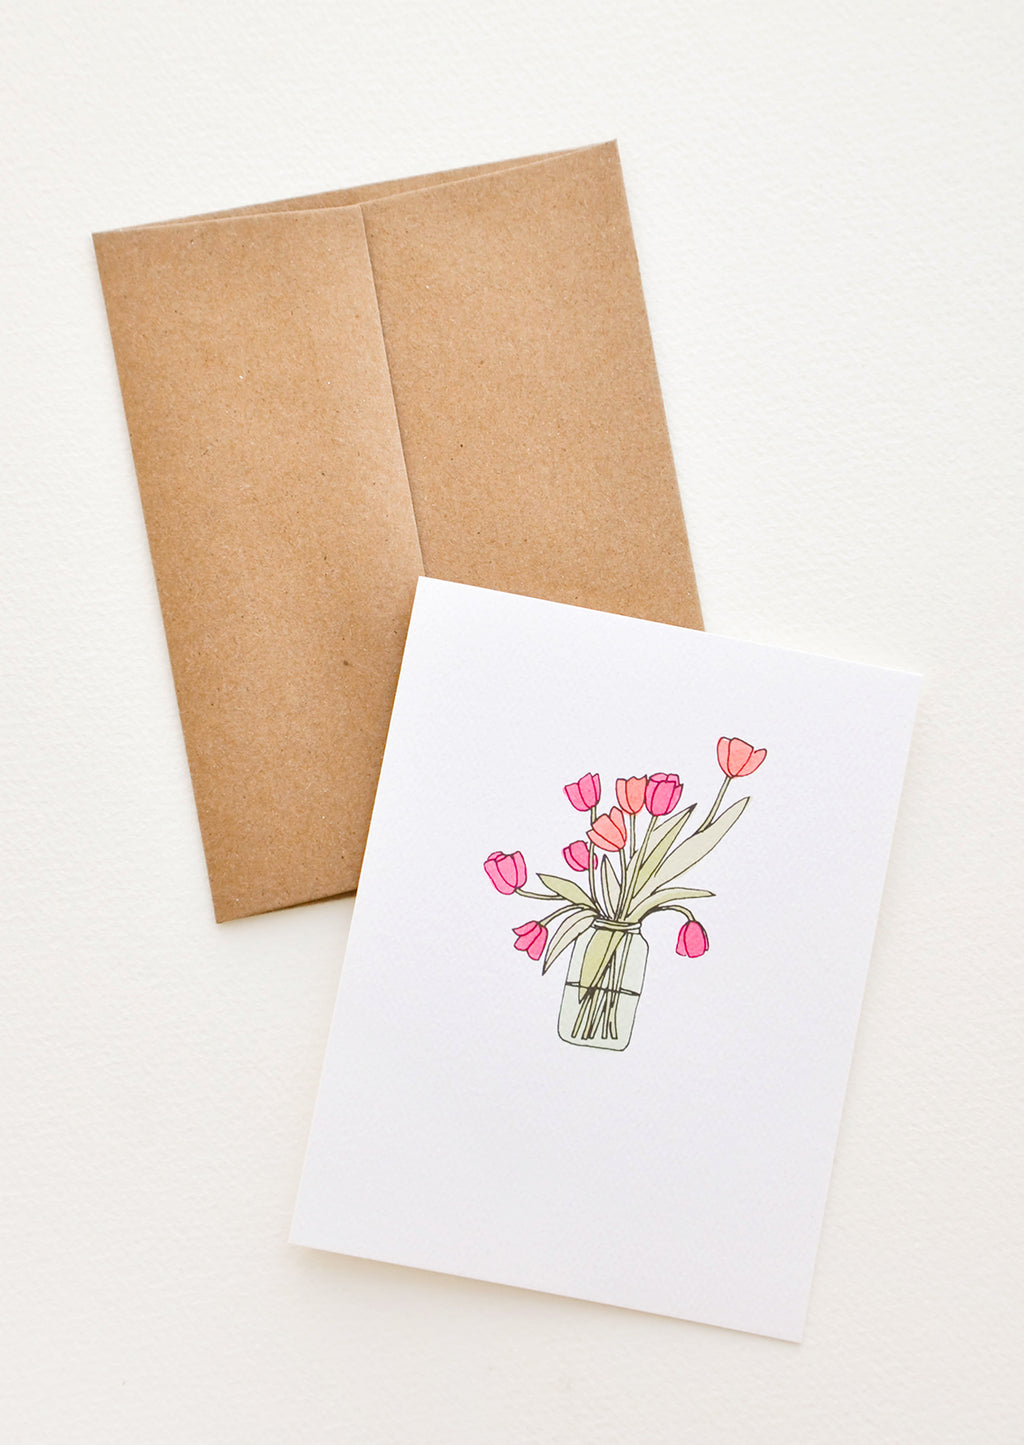 2: A greeting card with illustration of tulips in a glass vase.